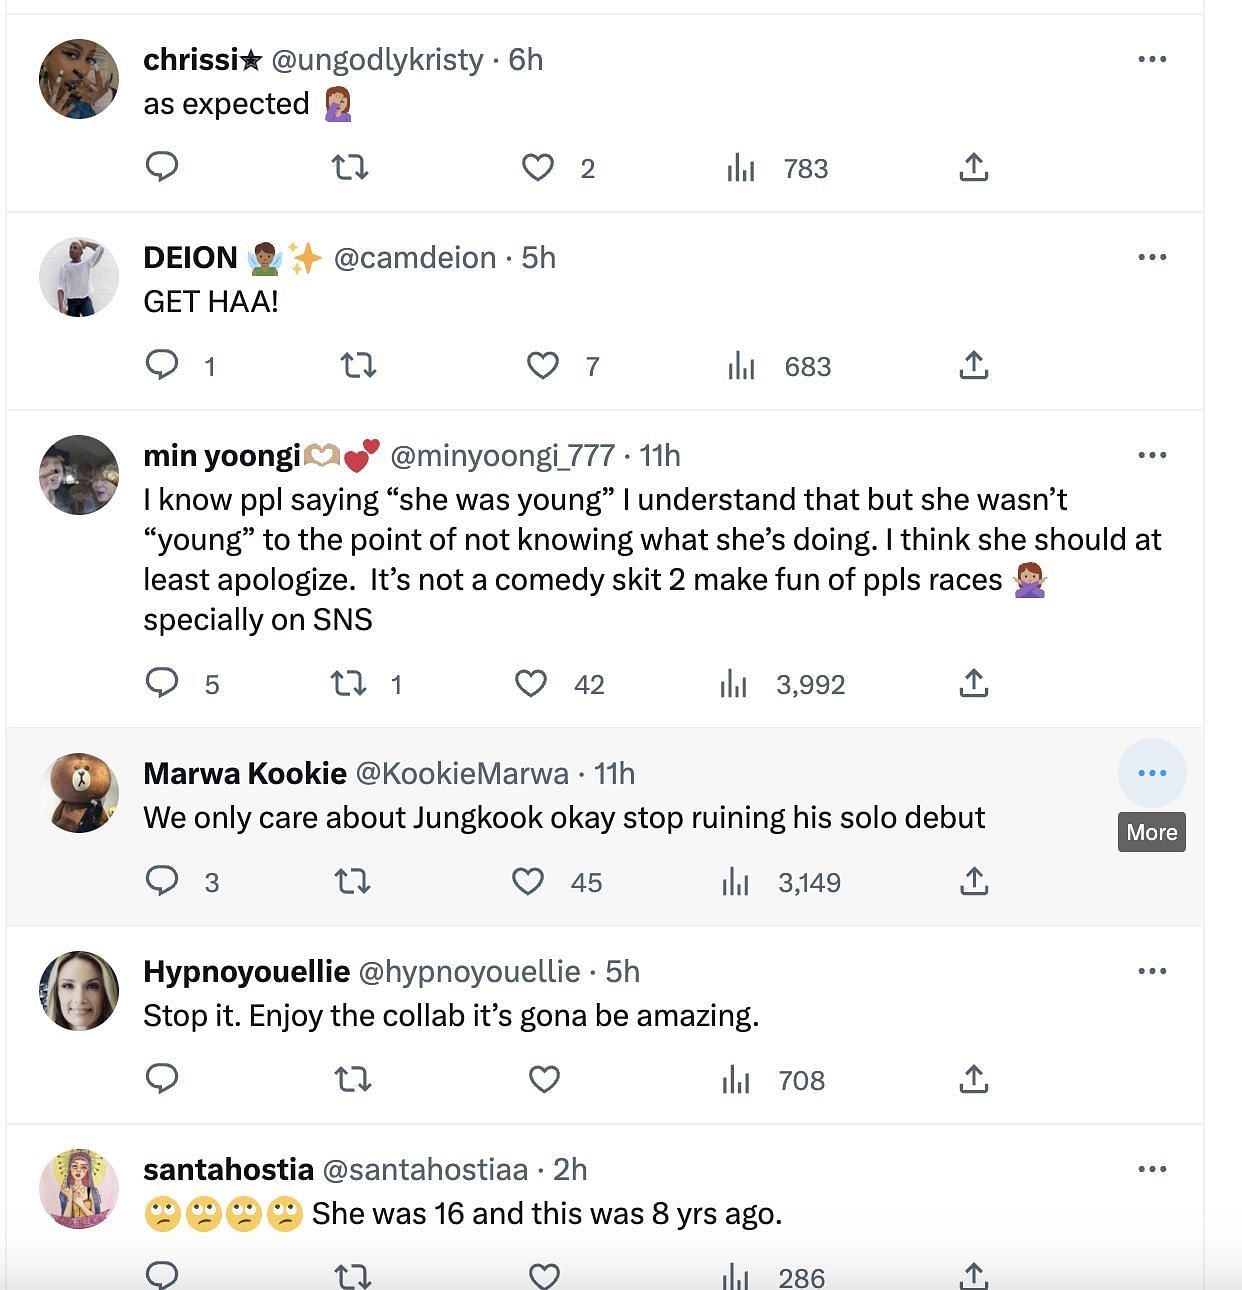 Social media users commented on the rapper&#039;s racist tweets and called them insensitive: Reactions explored. (Image via Twitter)